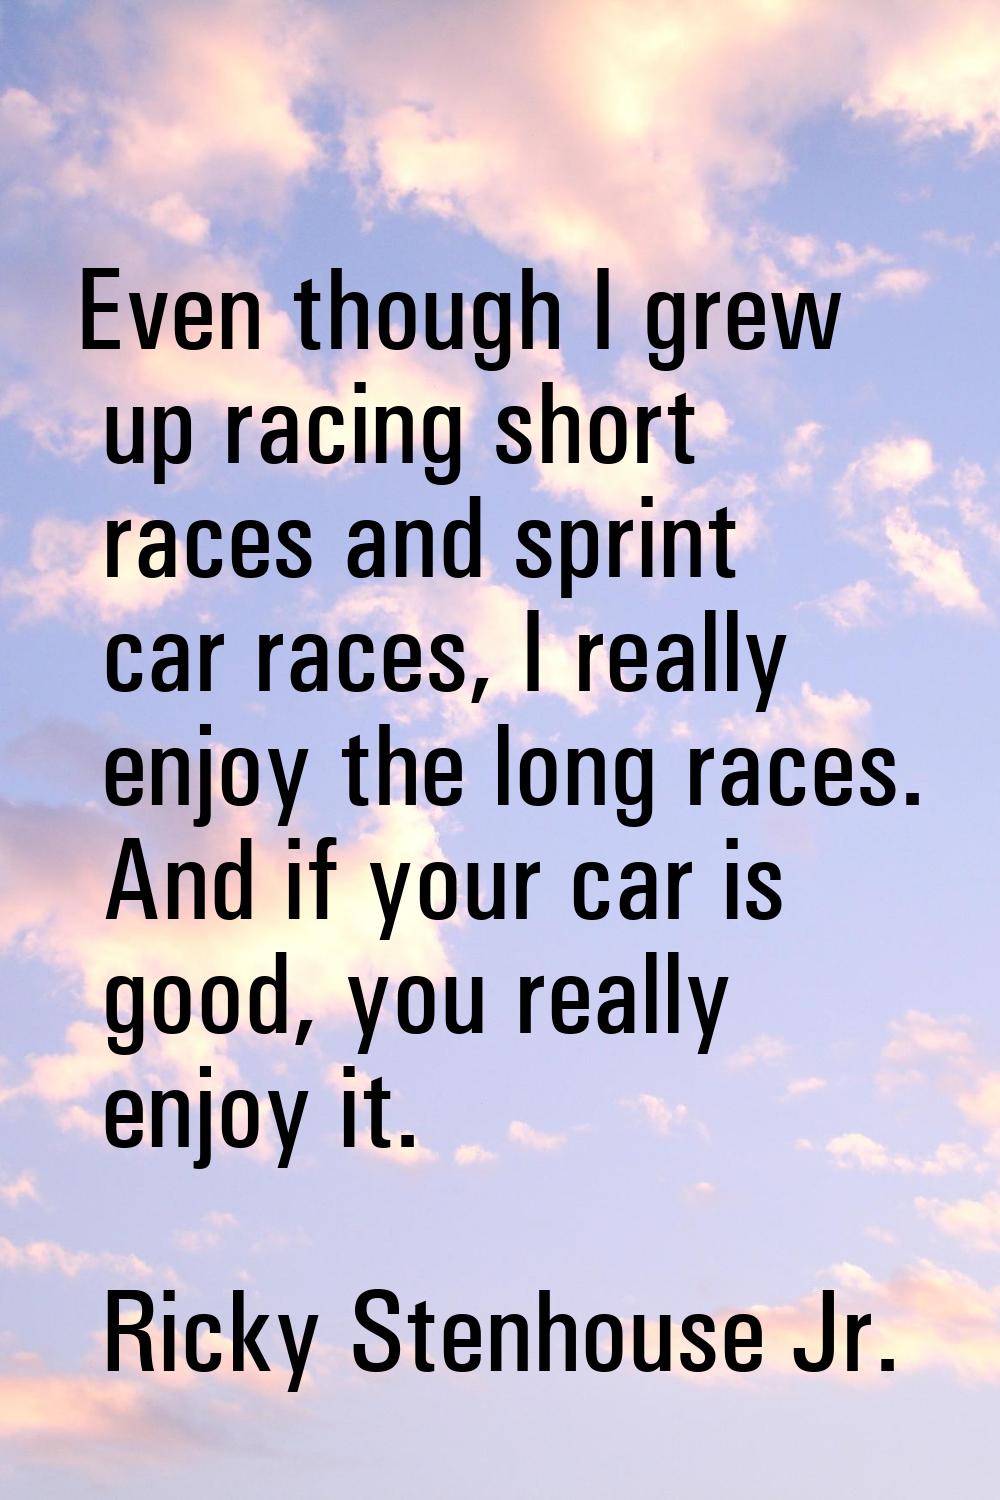 Even though I grew up racing short races and sprint car races, I really enjoy the long races. And i